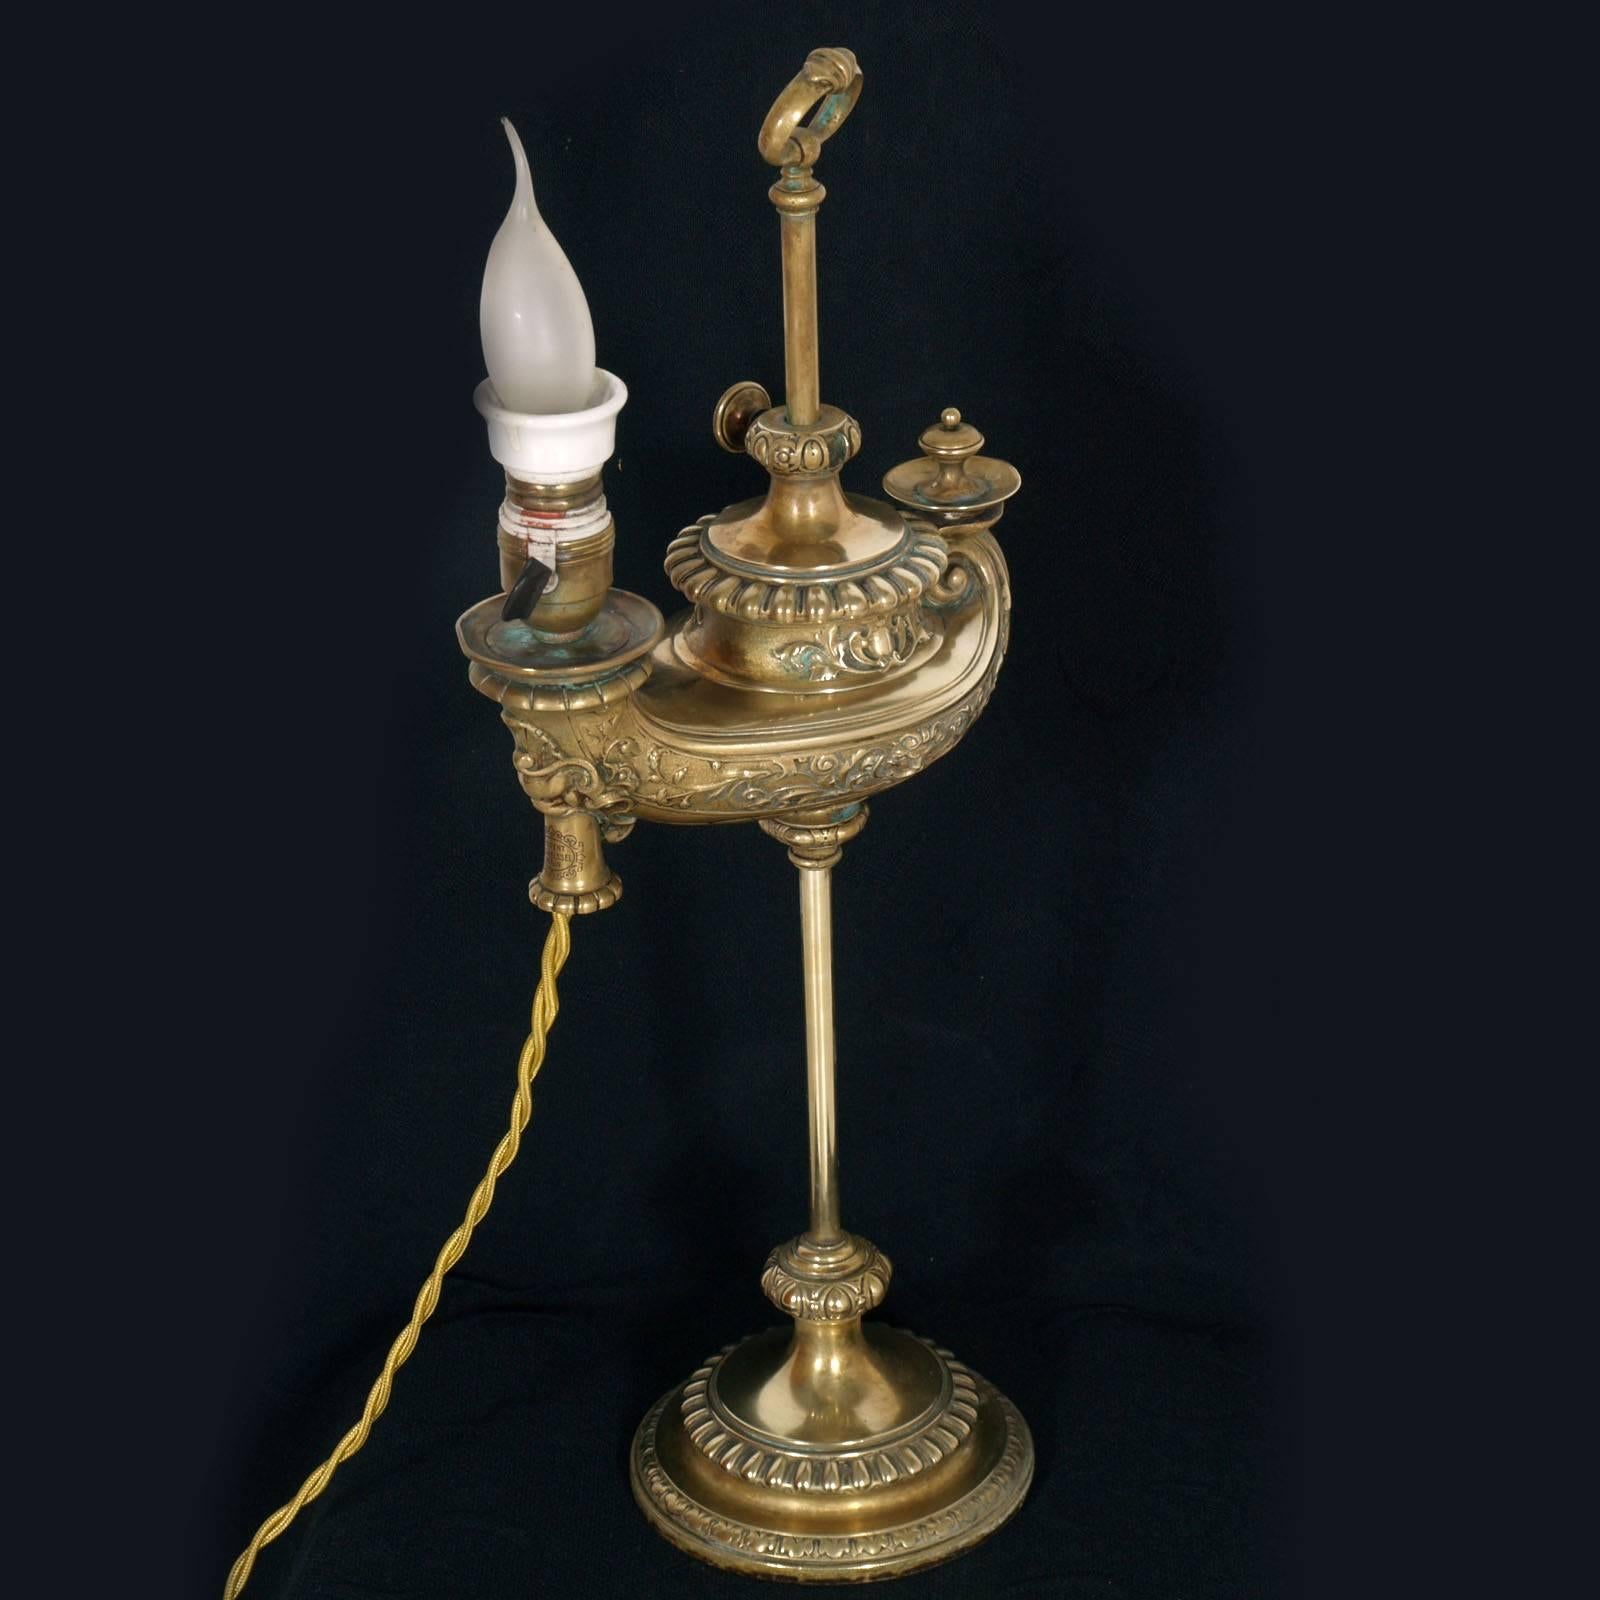 Table golden bronze lamp by Harvard Student, patent Wild & Wessel, aladino brass golden. 

Harvard German student lamp, Patent Wild & Wessel, Berlin. The lamp was subsequently electrified and the burner was removed leaving the white ceramic